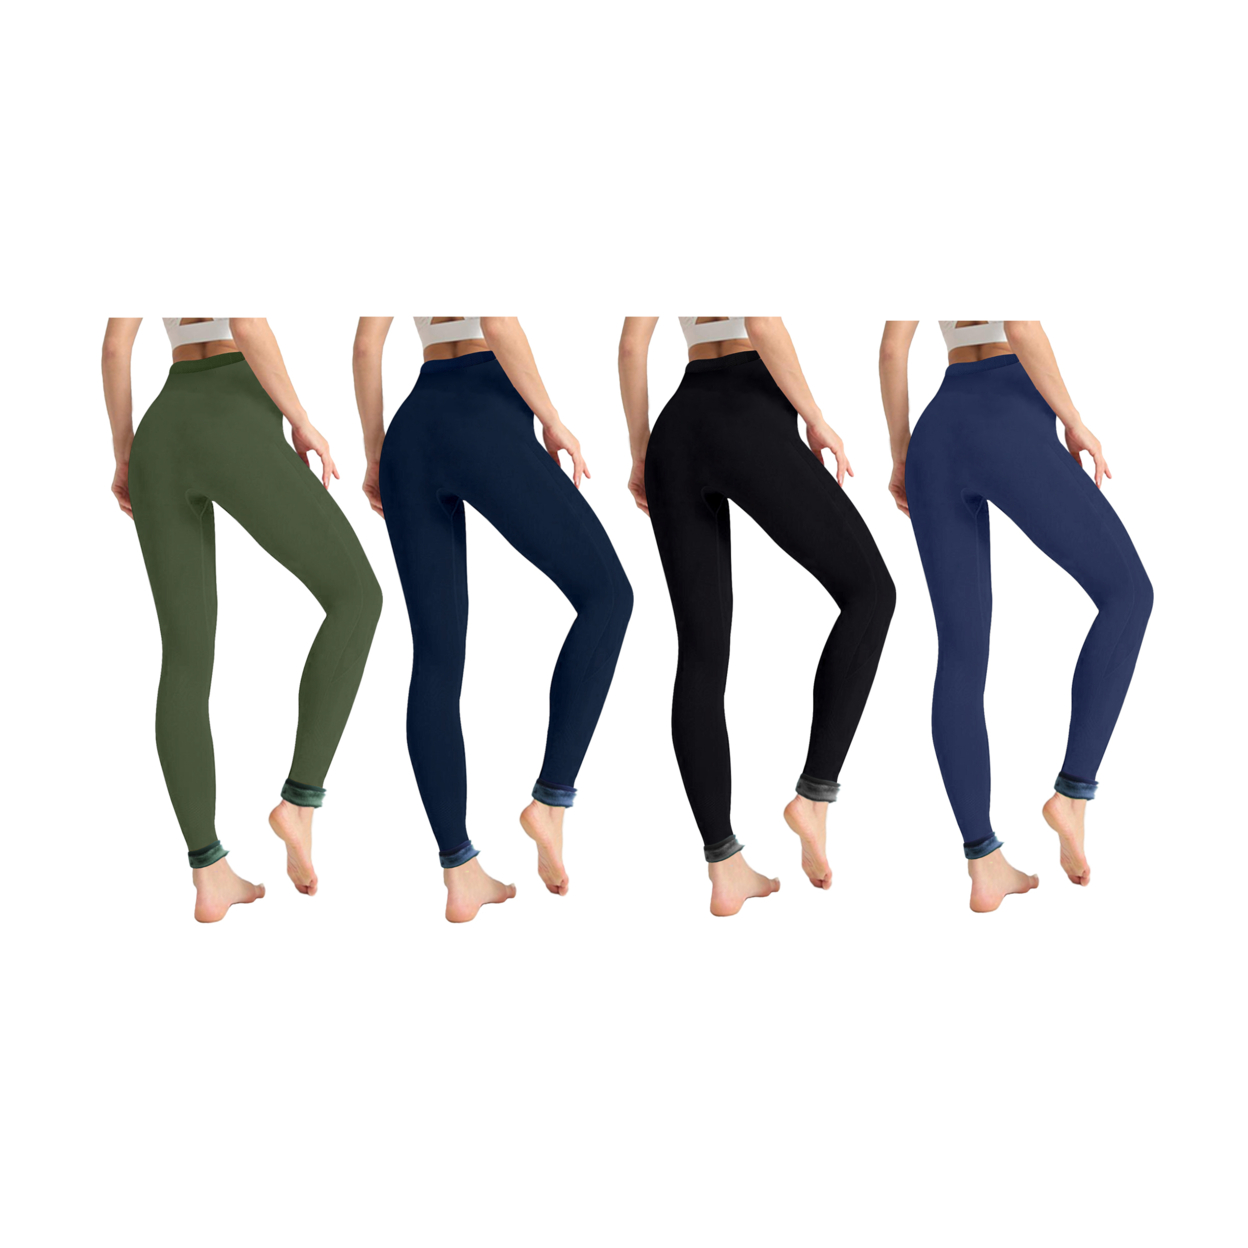 4-Pack: Women's Winter Warm Thick Fur Lined Thermal Leggings (S-2XL) - Assorted, Medium/Large